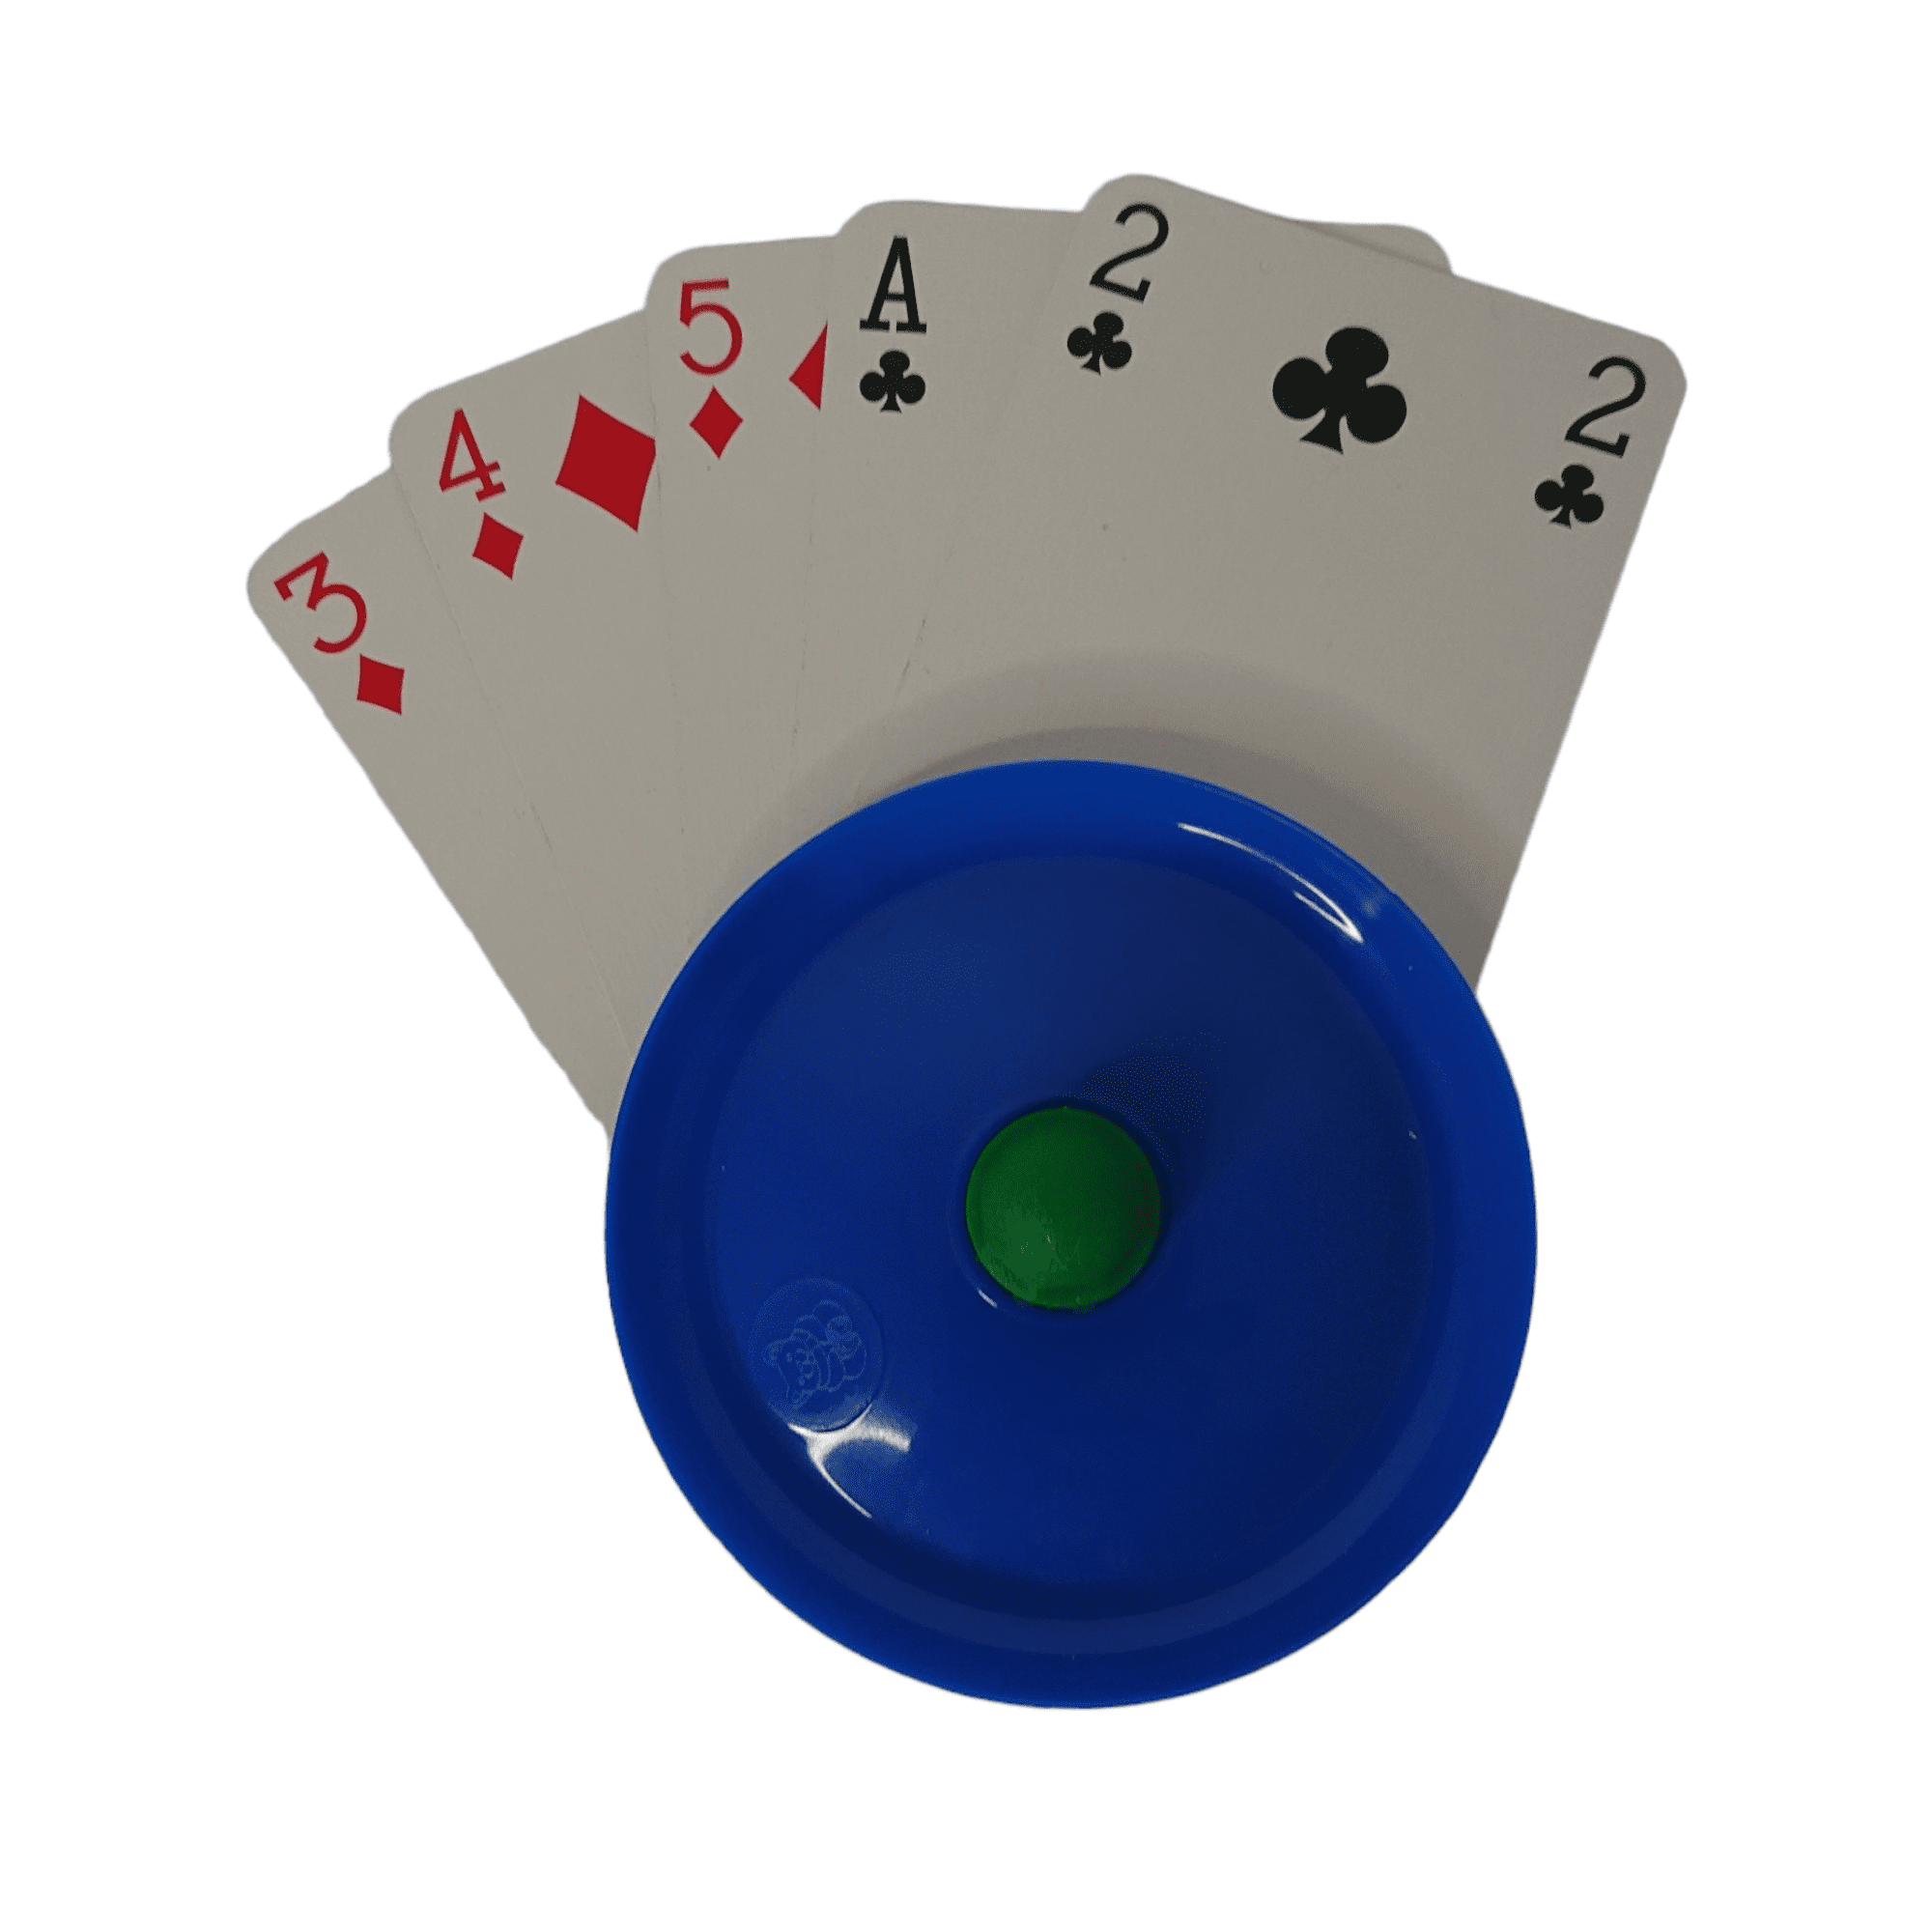 Playing card holder, showing set of cards